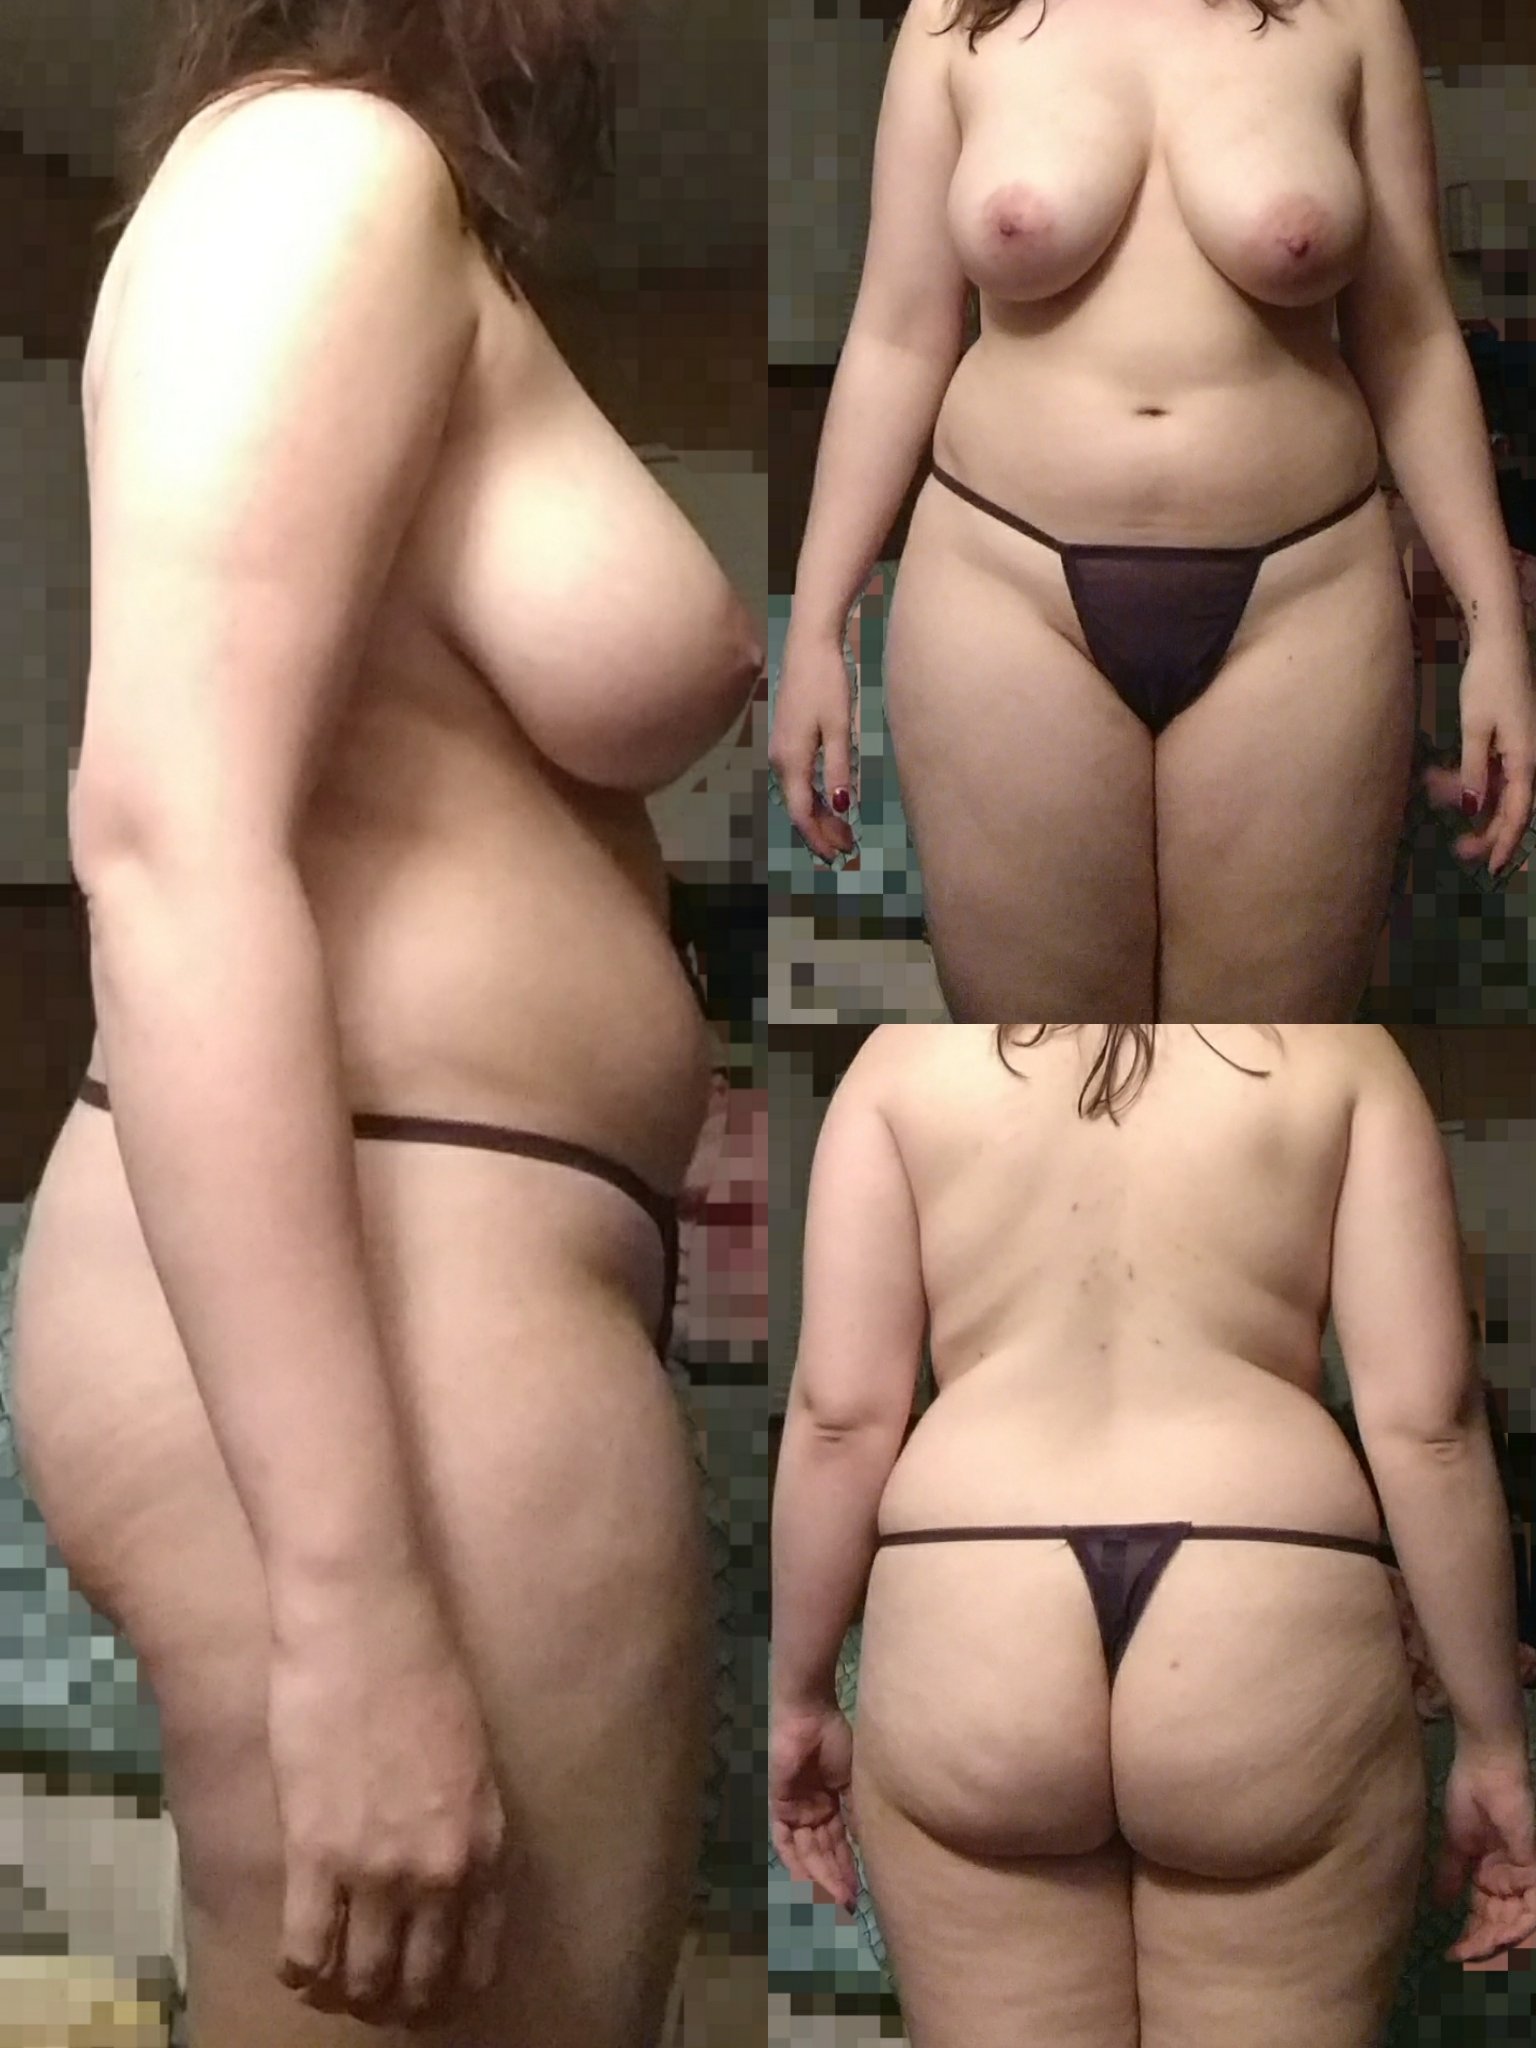 Just posted in normal nudes as well, but i just list 10lbs from last week !!